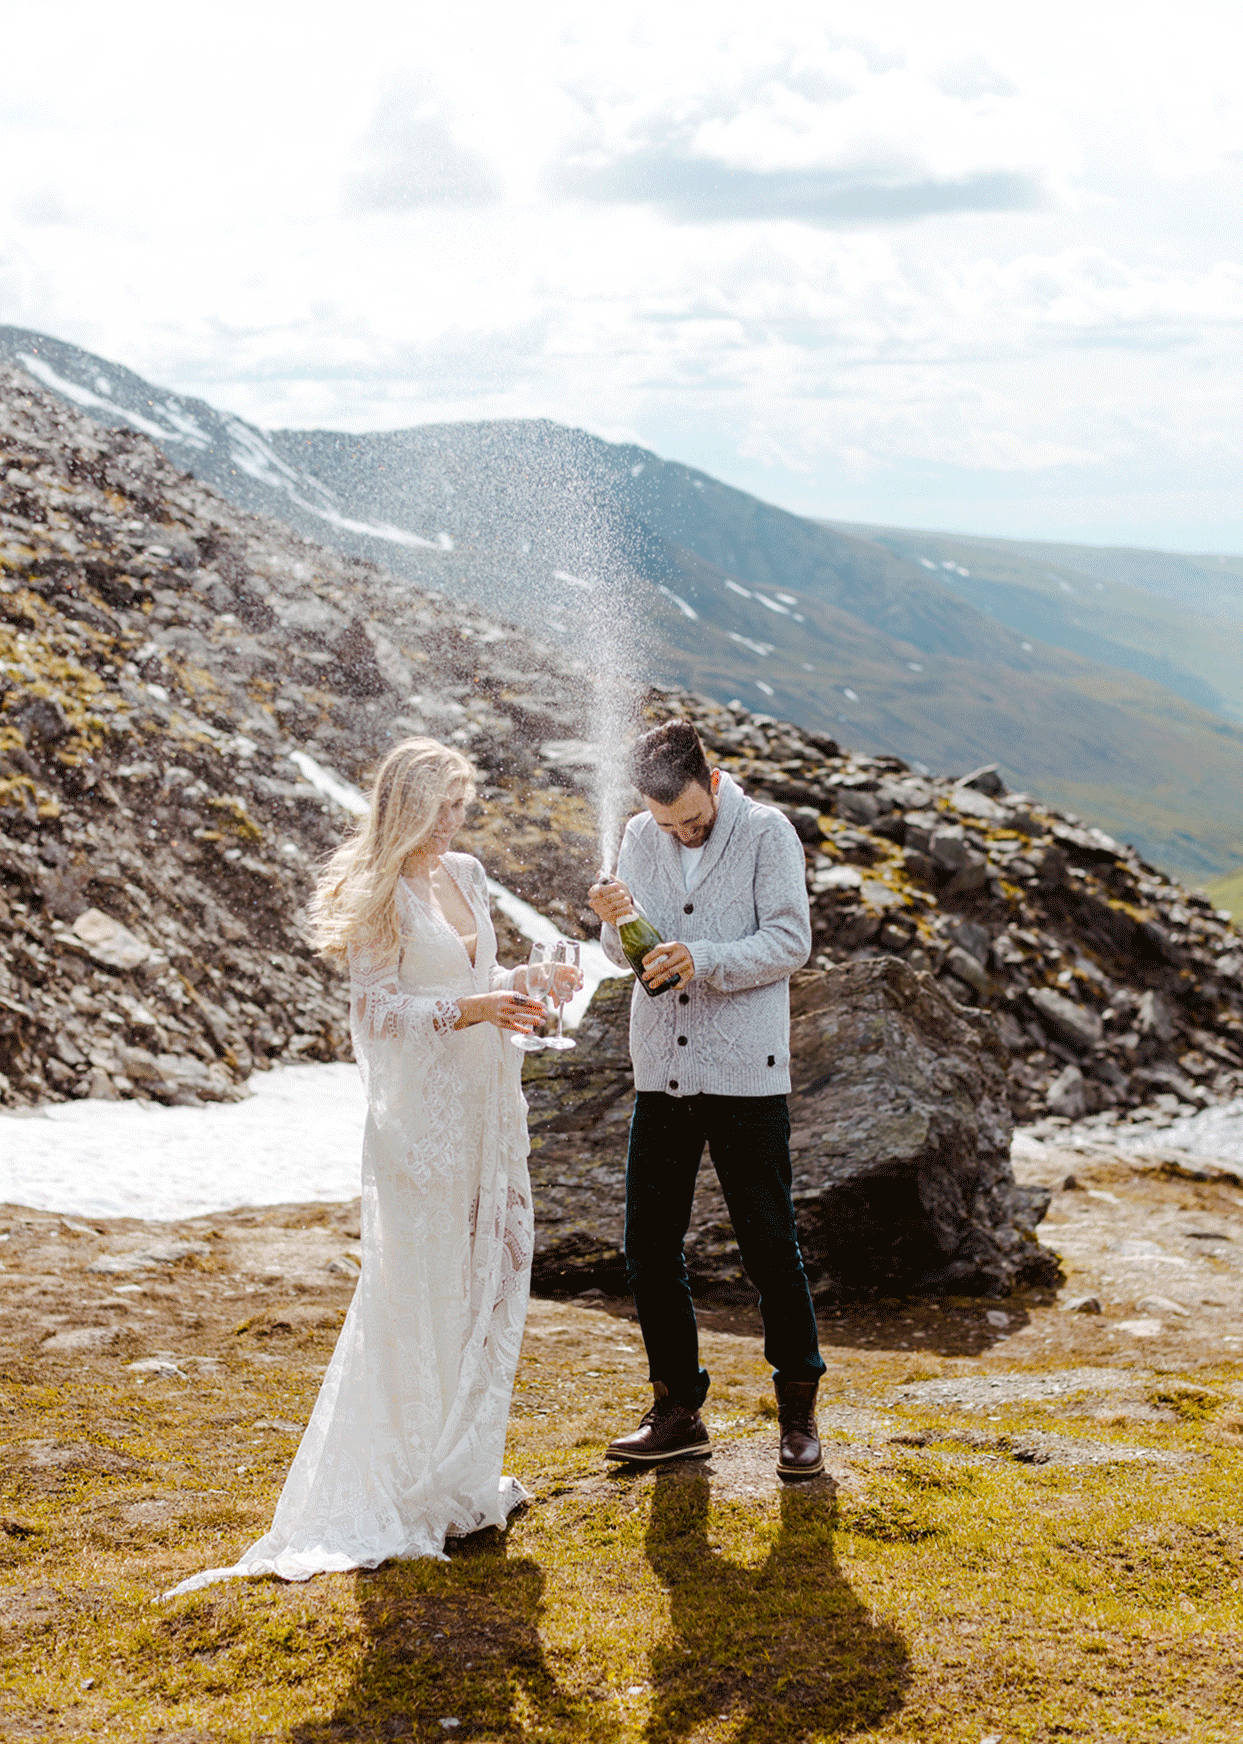 GIF of a bride and groom spraying champagne while kissing in the mountains